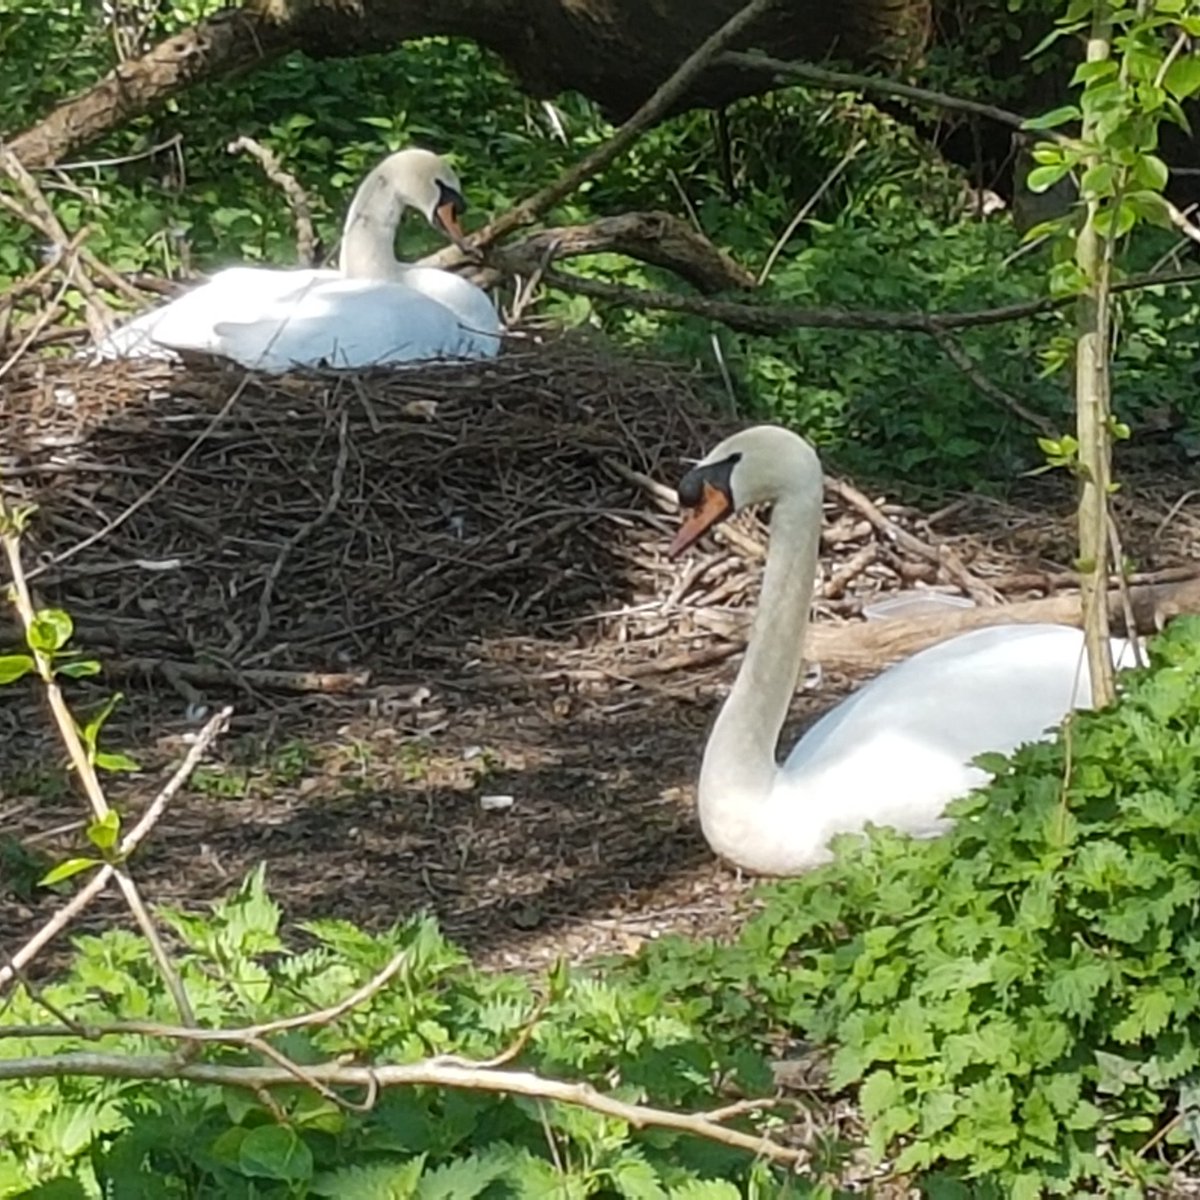 beautiful swans nesting peacefully on river weaver today #swanwatch #nantwich #riverweaver